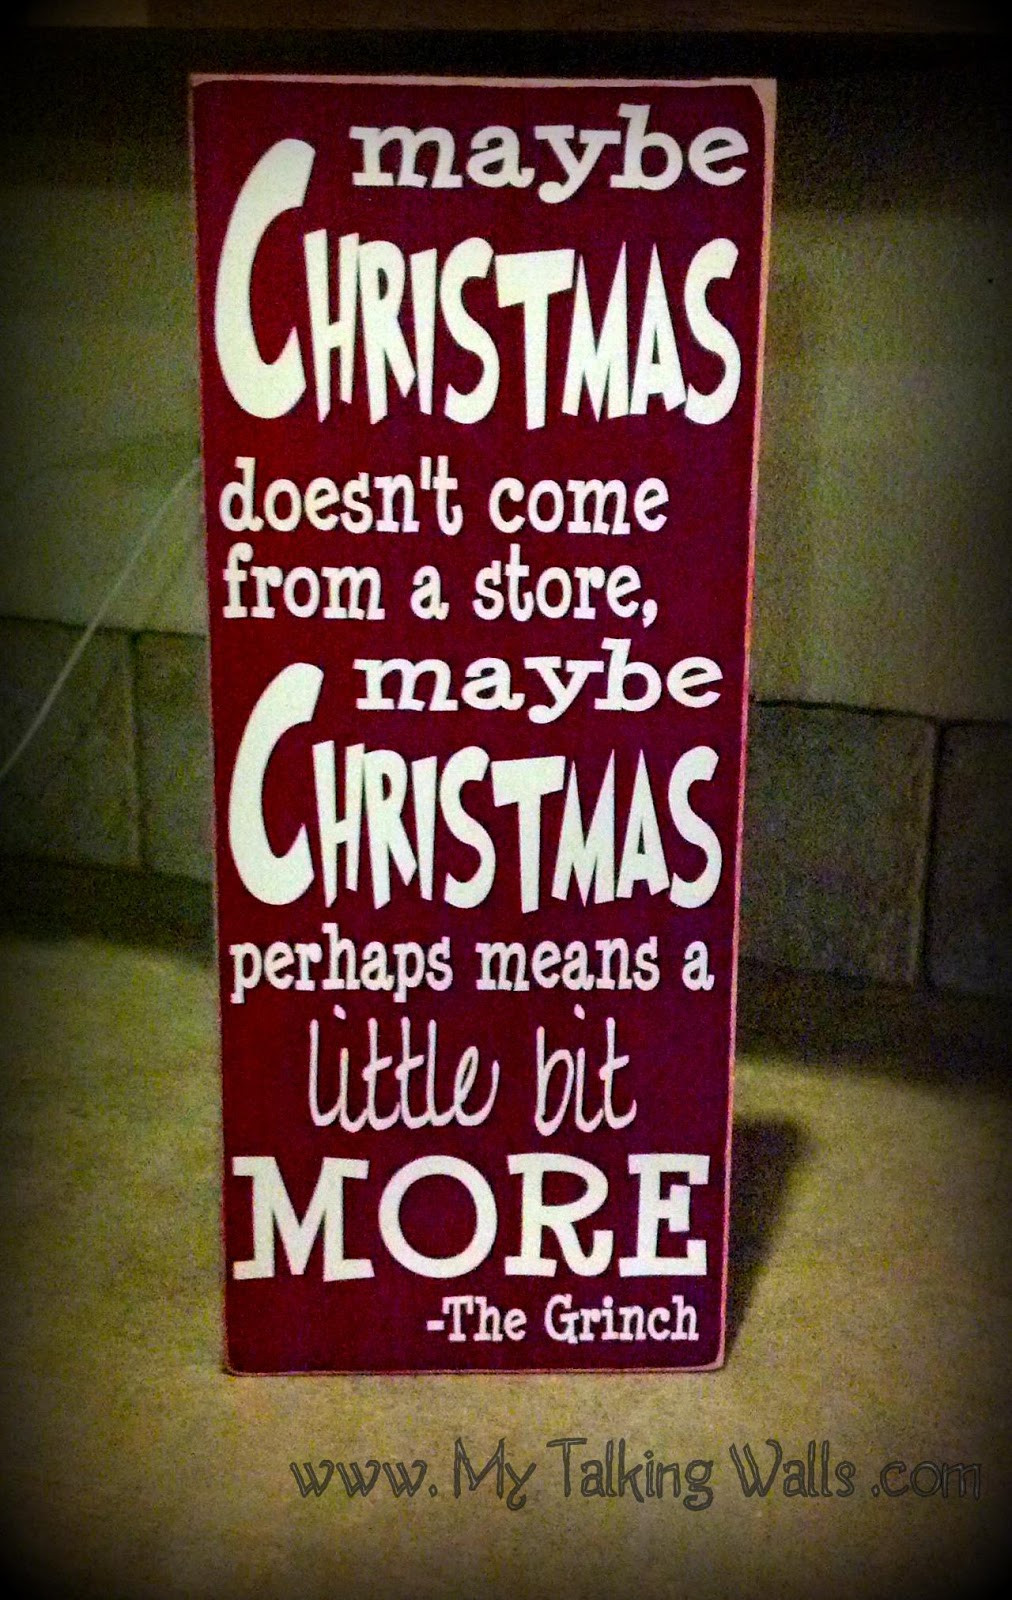 Grinch Christmas Quote
 Famous Quotes From The Grinch QuotesGram